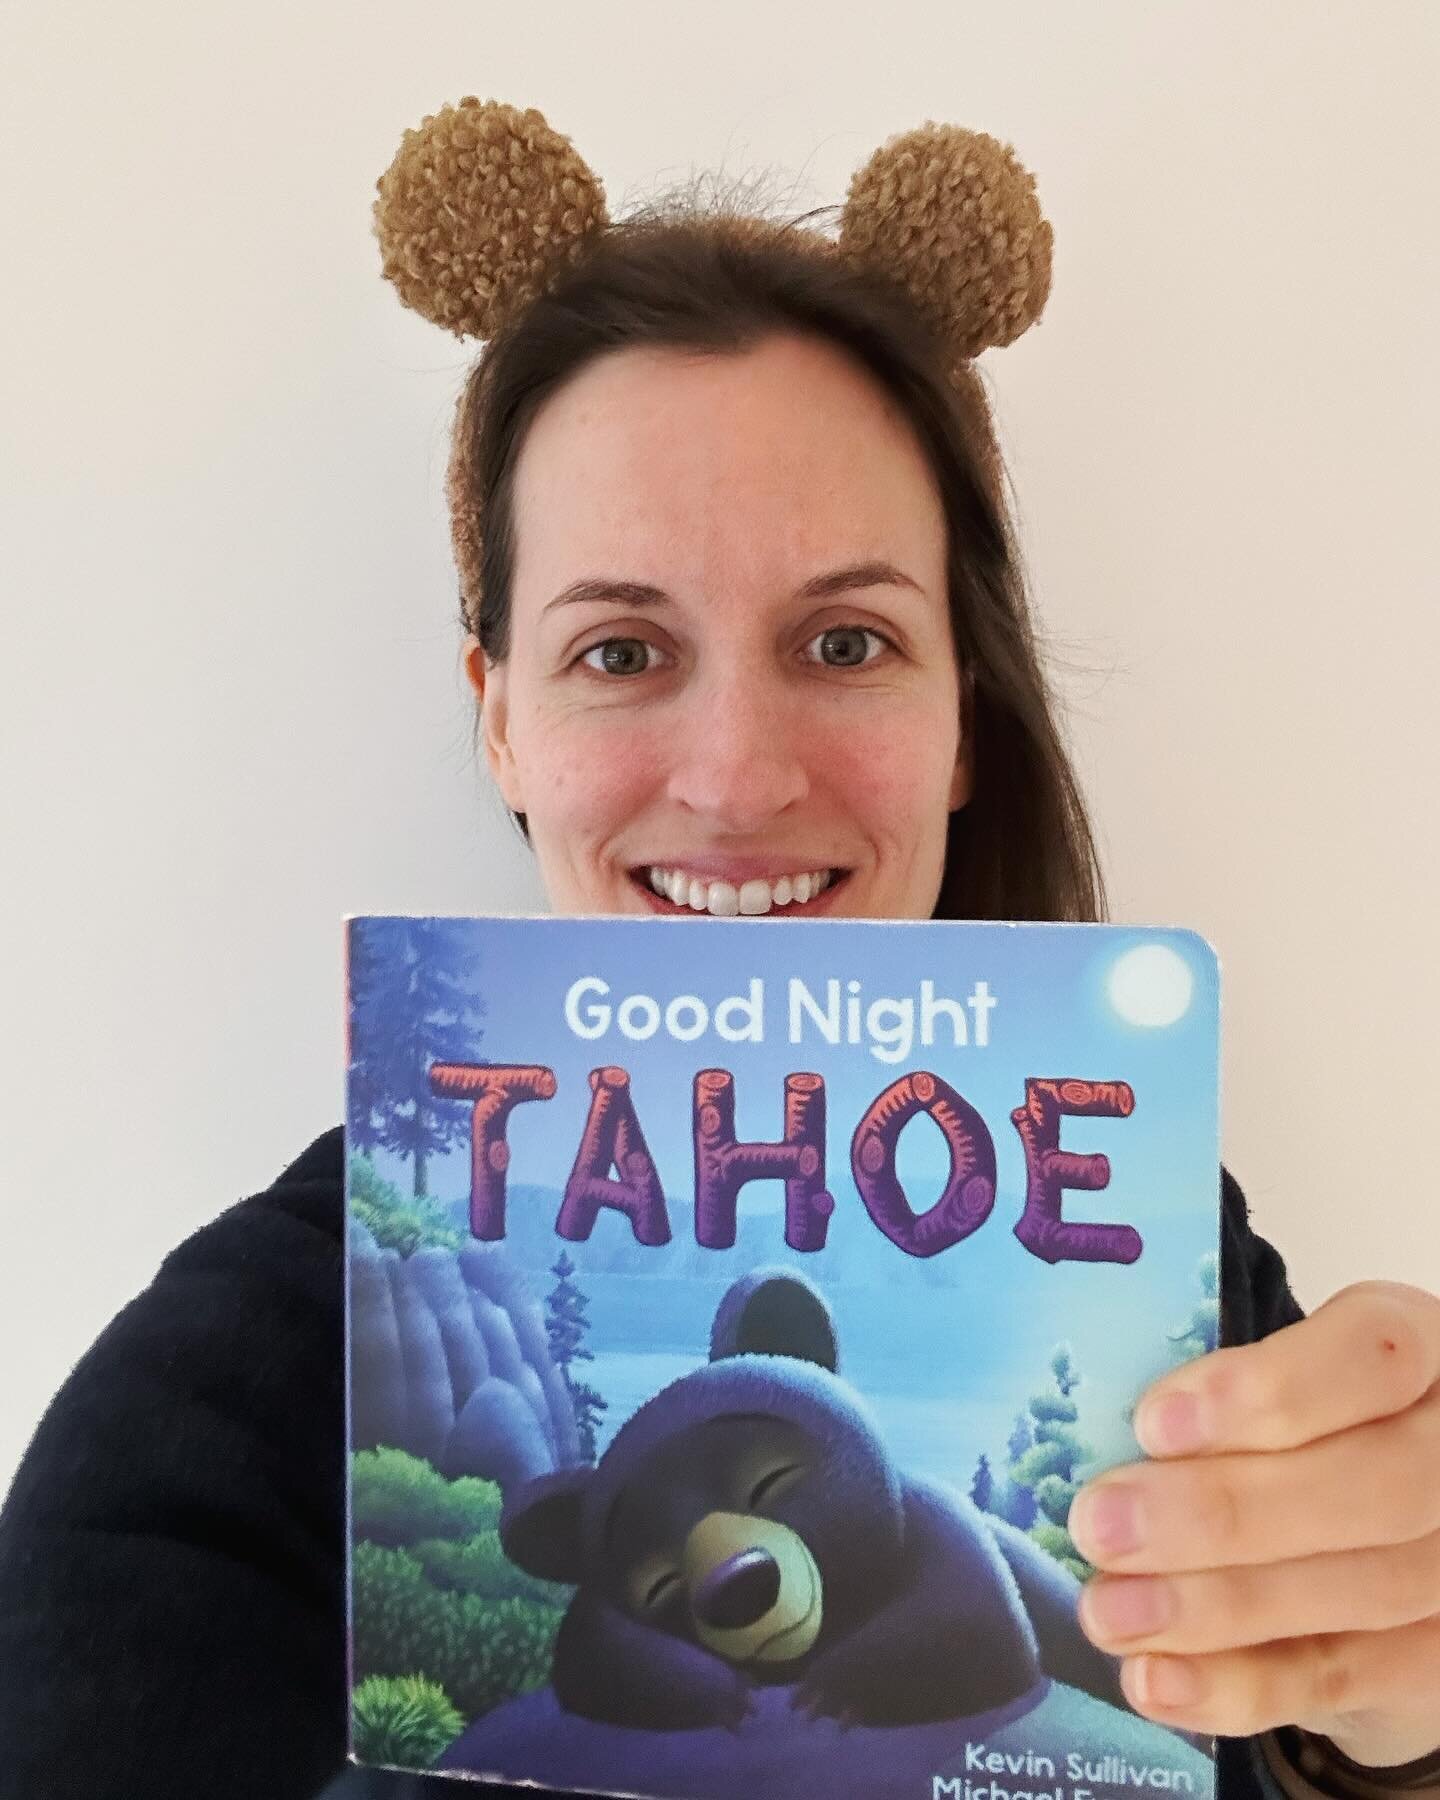 When you&rsquo;re more excited about World Book Day than your toddler! 🐻 Shout out to the (long!) children&rsquo;s book I now know off-by-heart. And grateful to be sharing the magic of reading.
&bull;
&bull;
&bull;
&bull;
#WorldBookDay #GoodnightTah